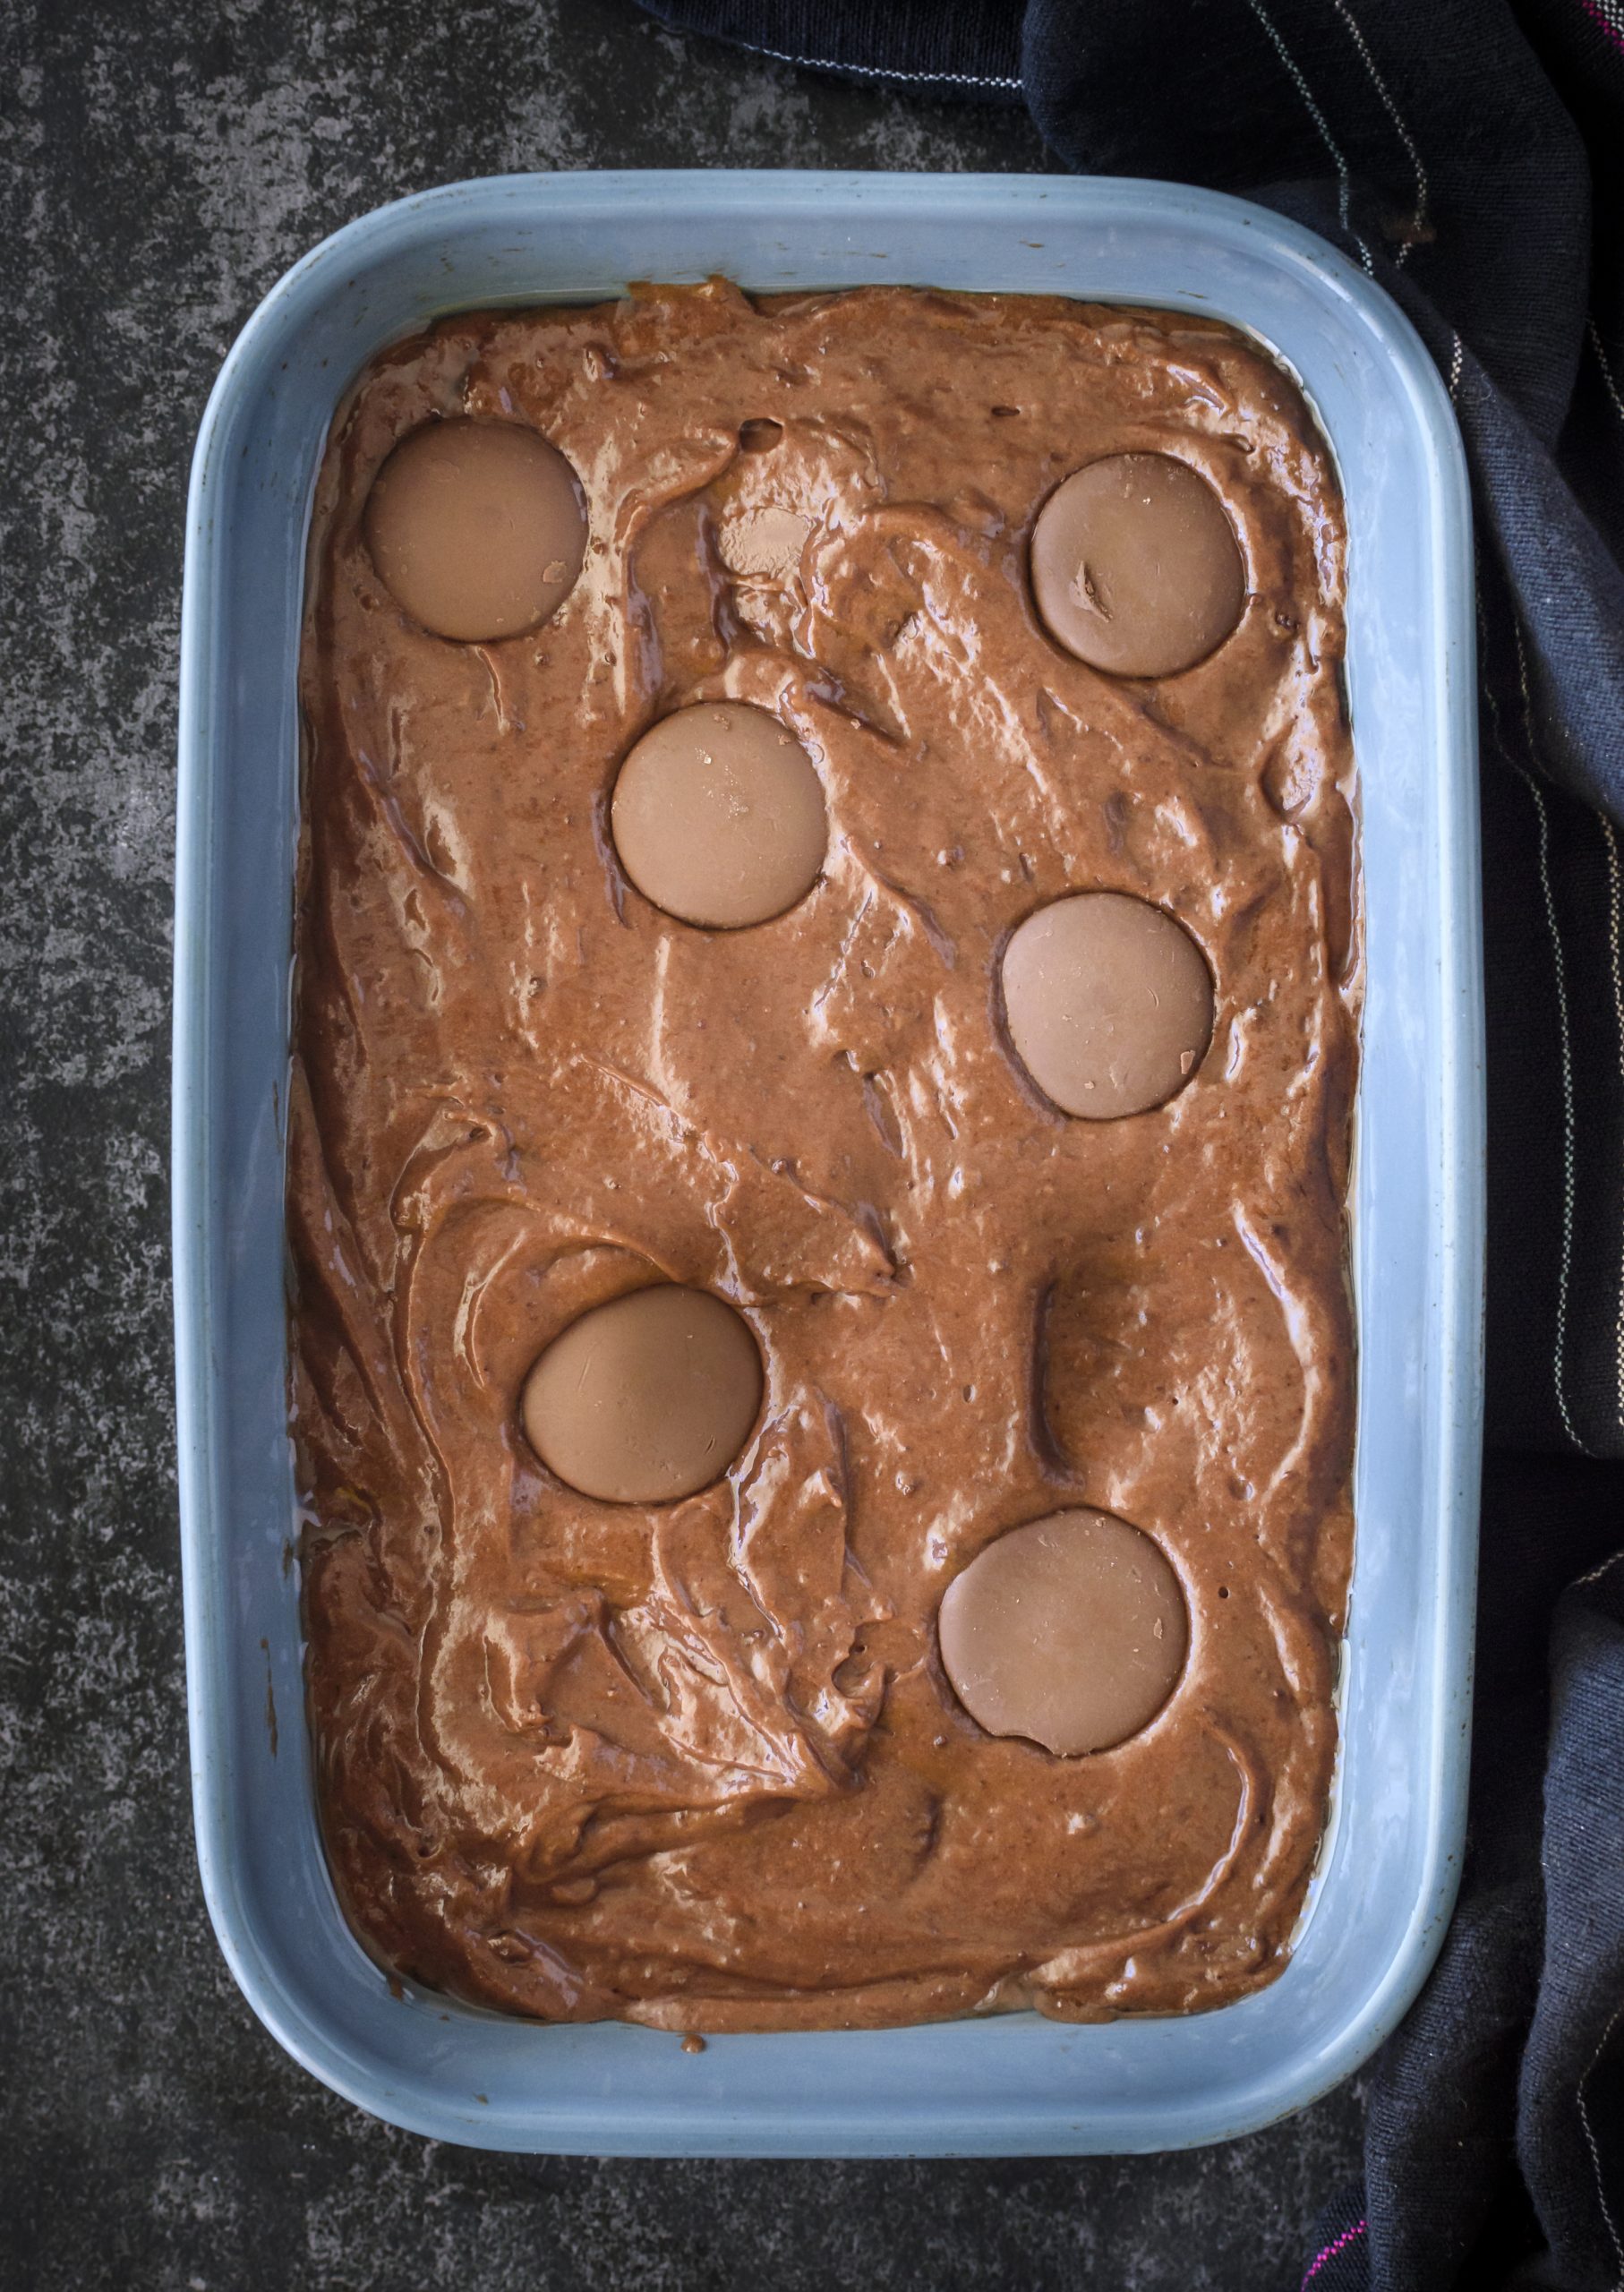 Spread the batter into the greased baking dish. 